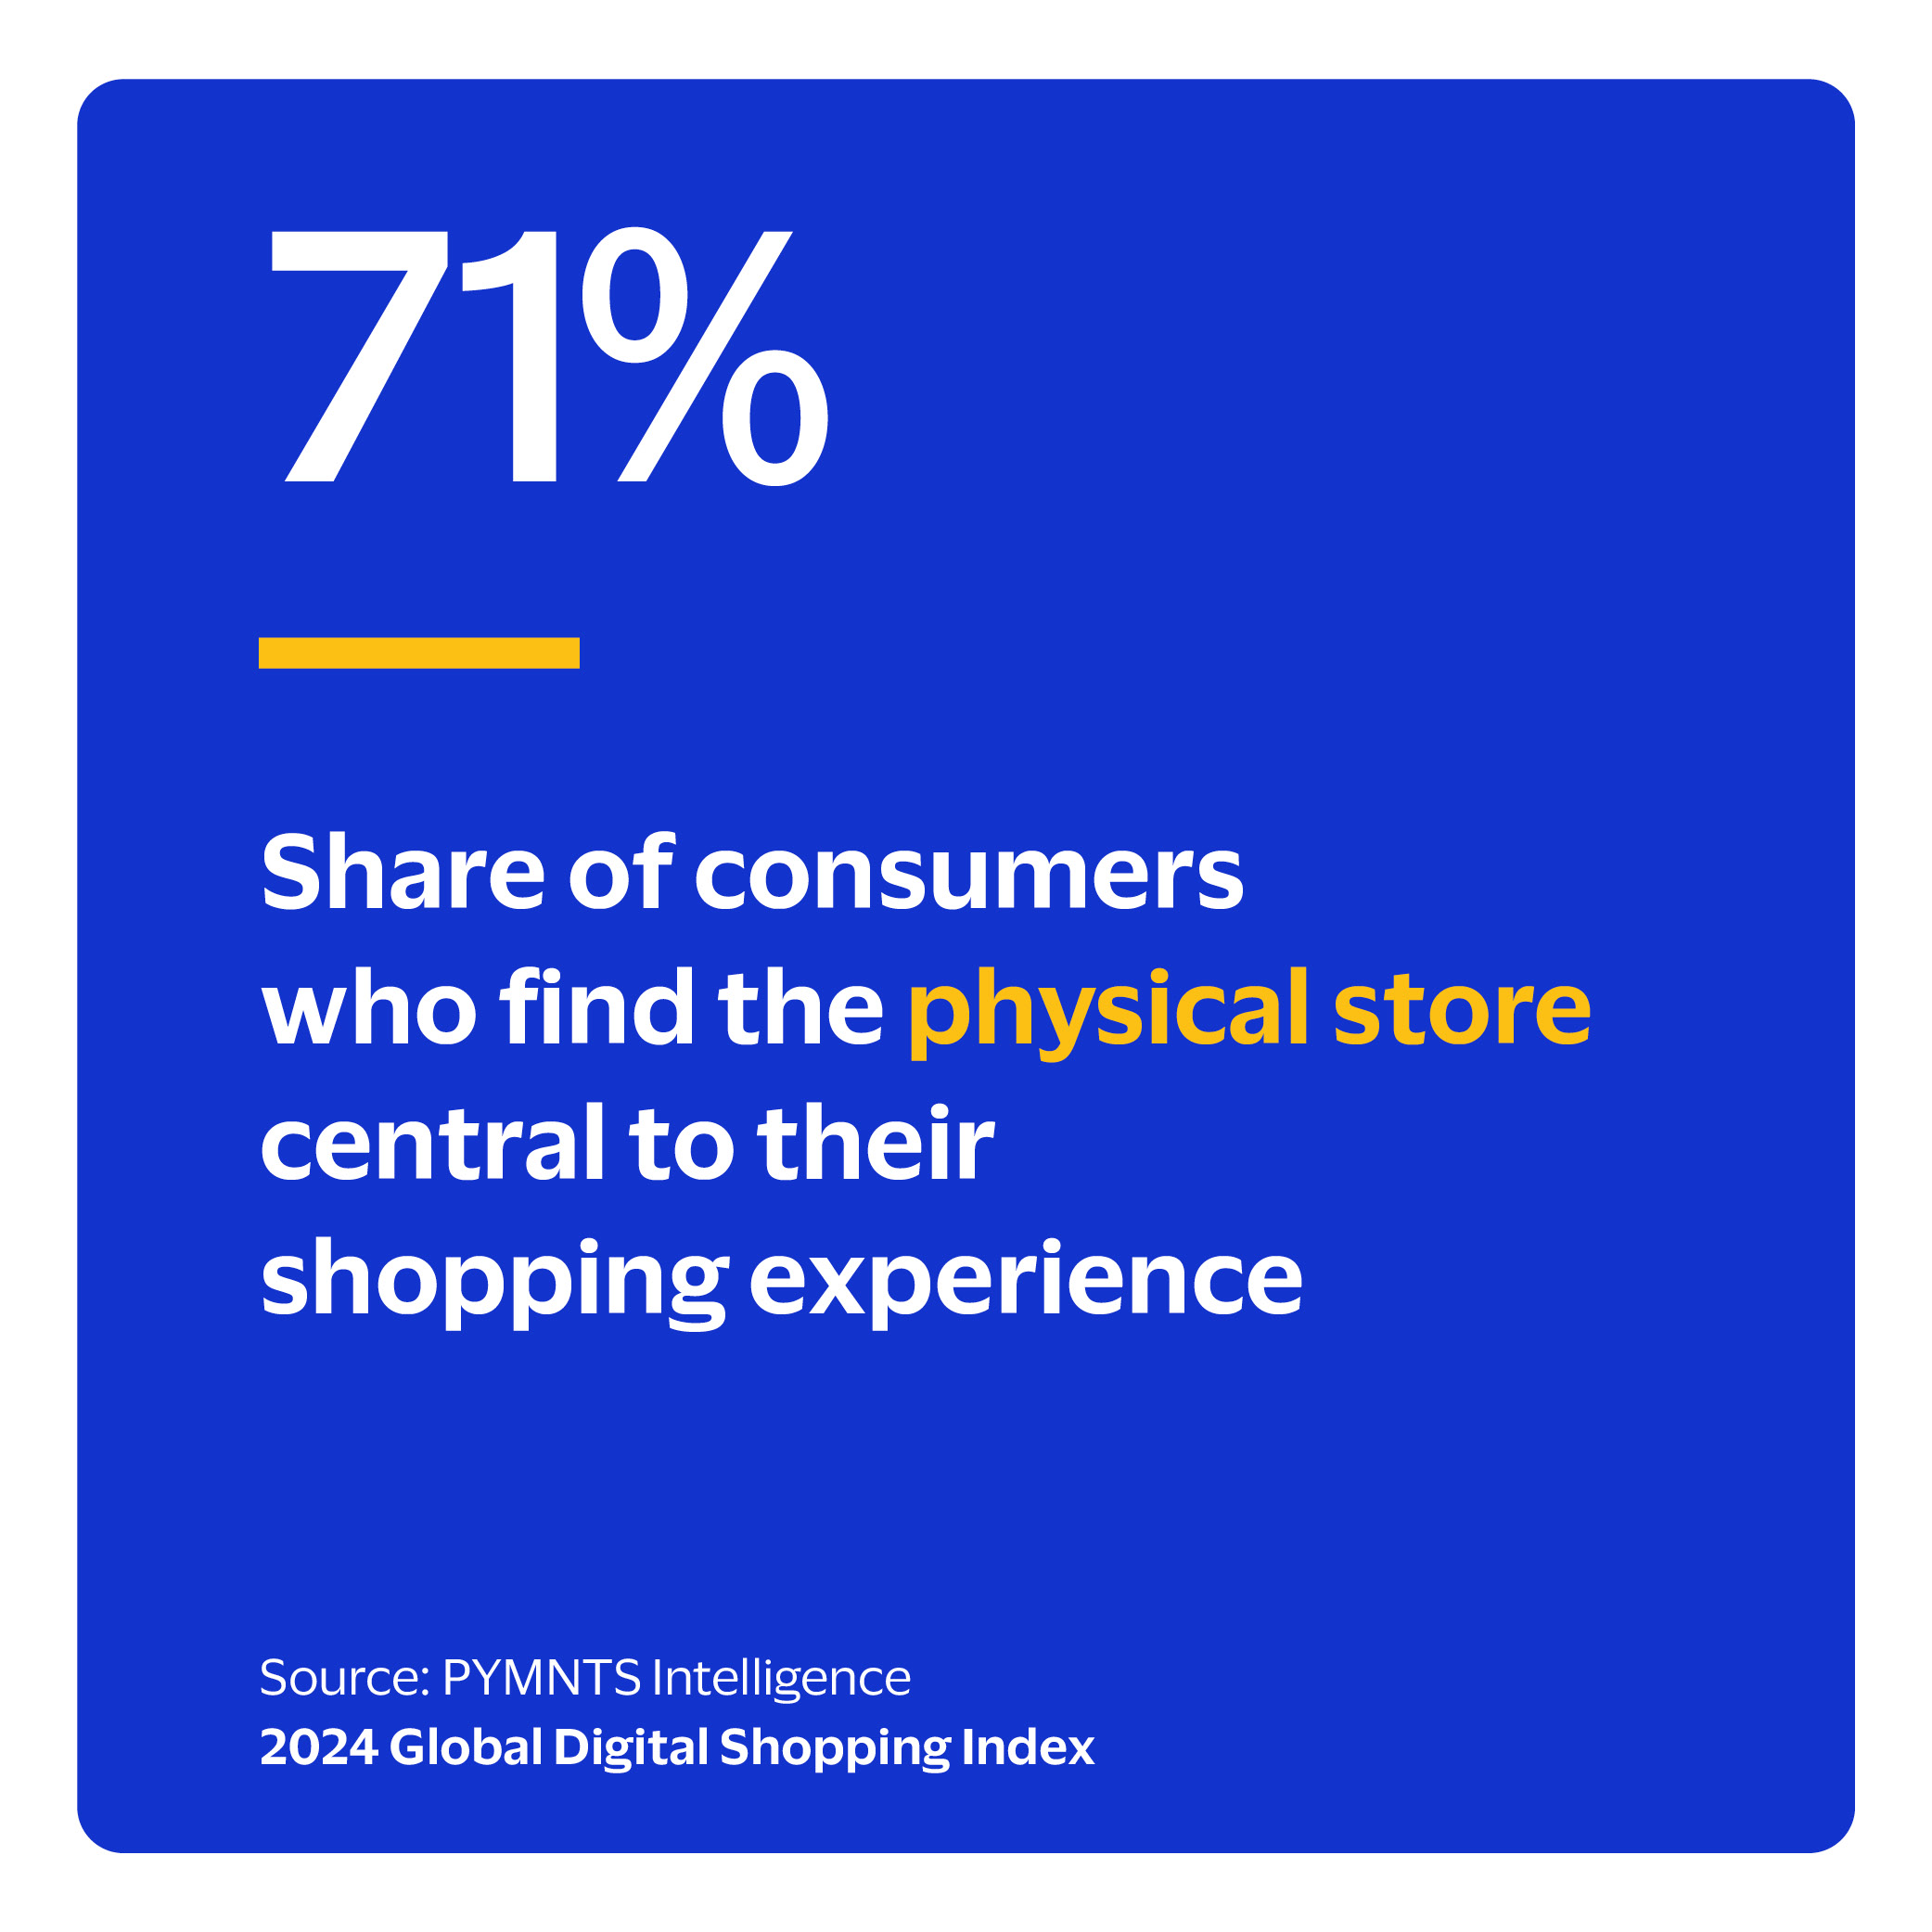  Share of consumers who find the physical store central to their shopping experience